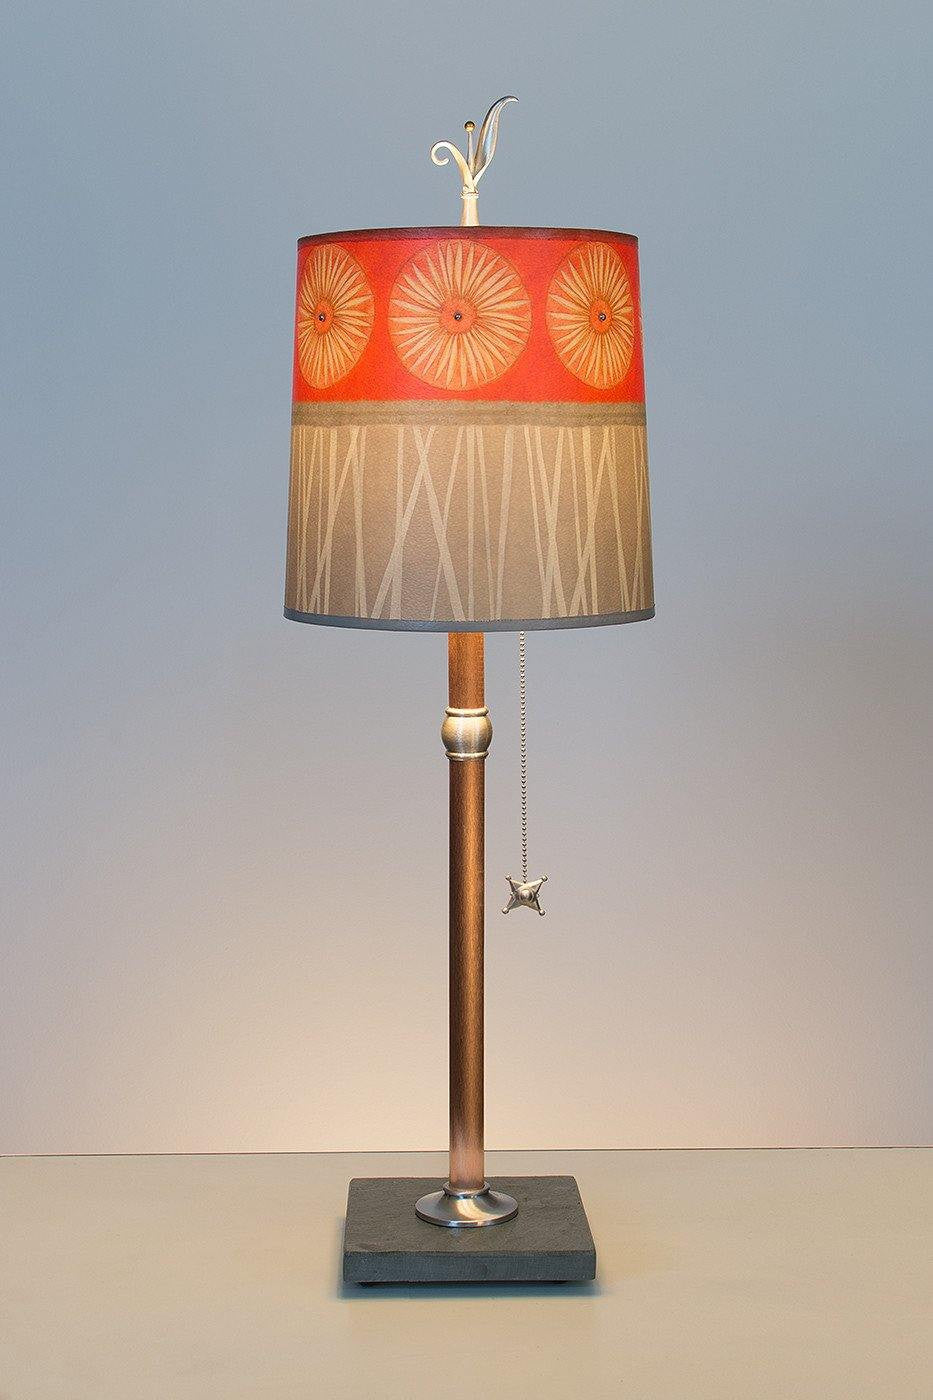 Janna Ugone & Co Table Lamps Copper Table Lamp with Medium Drum Shade in Tang